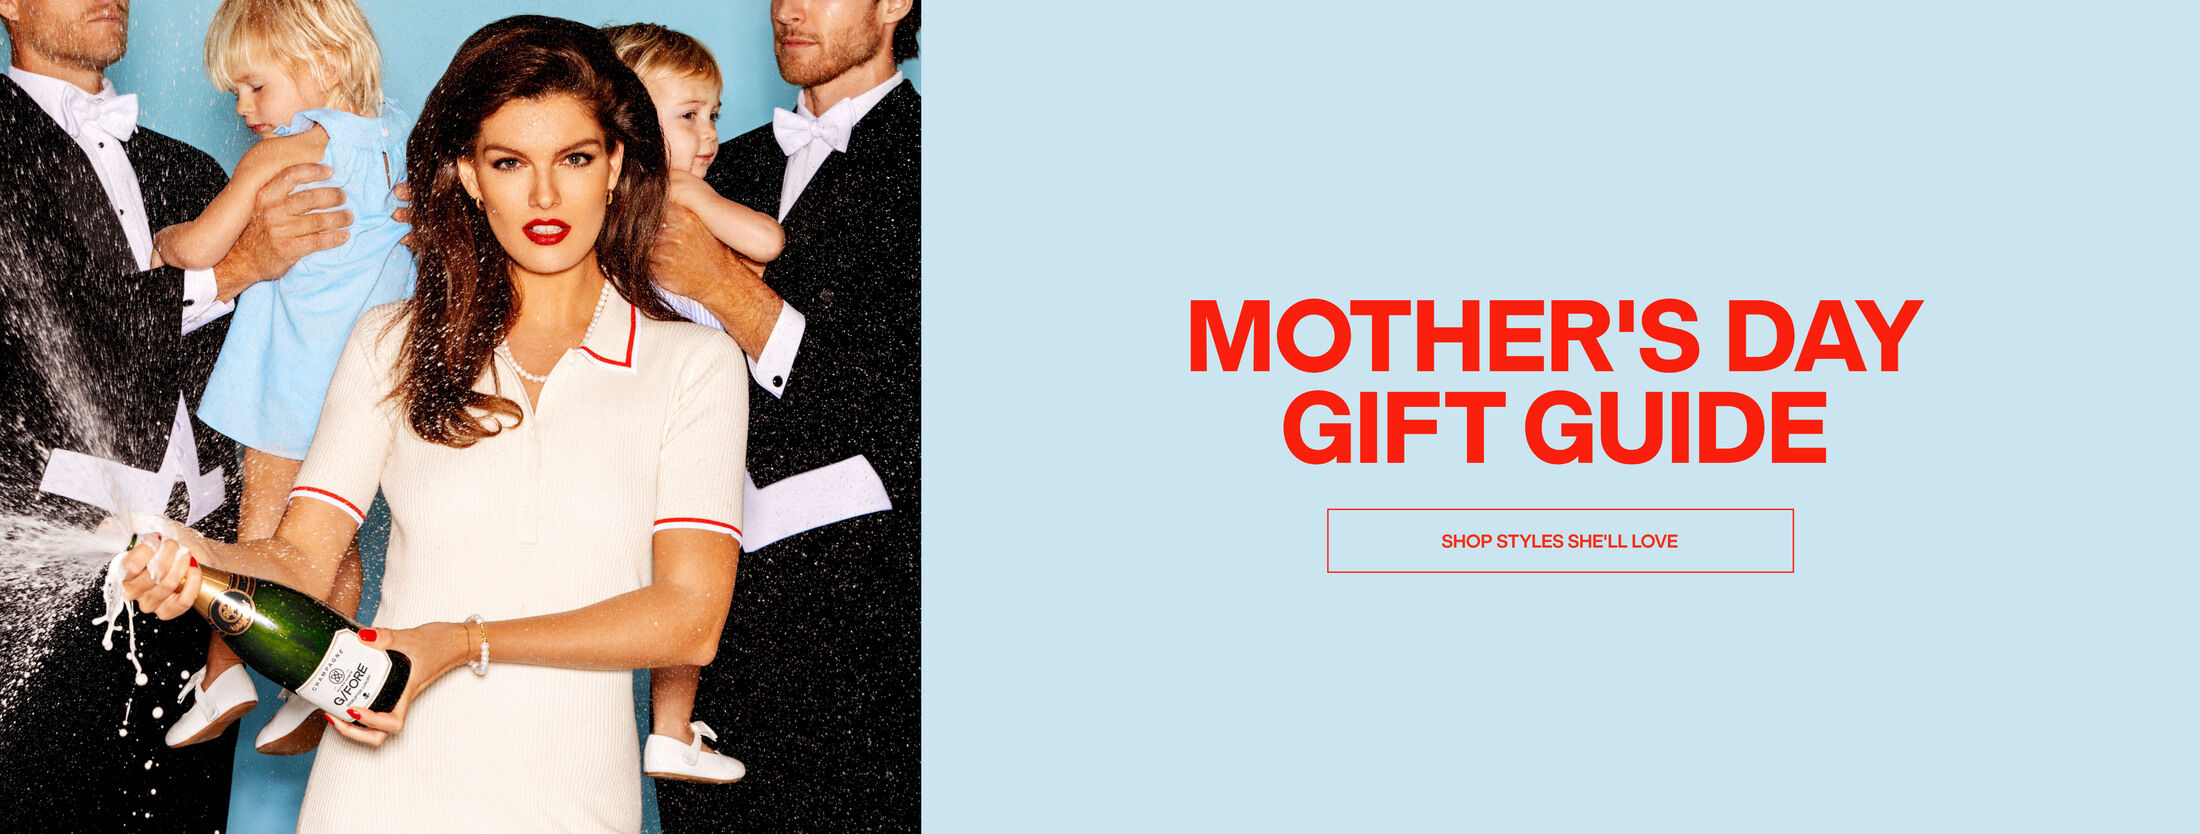 Explore the Mother's Day Gift Guide